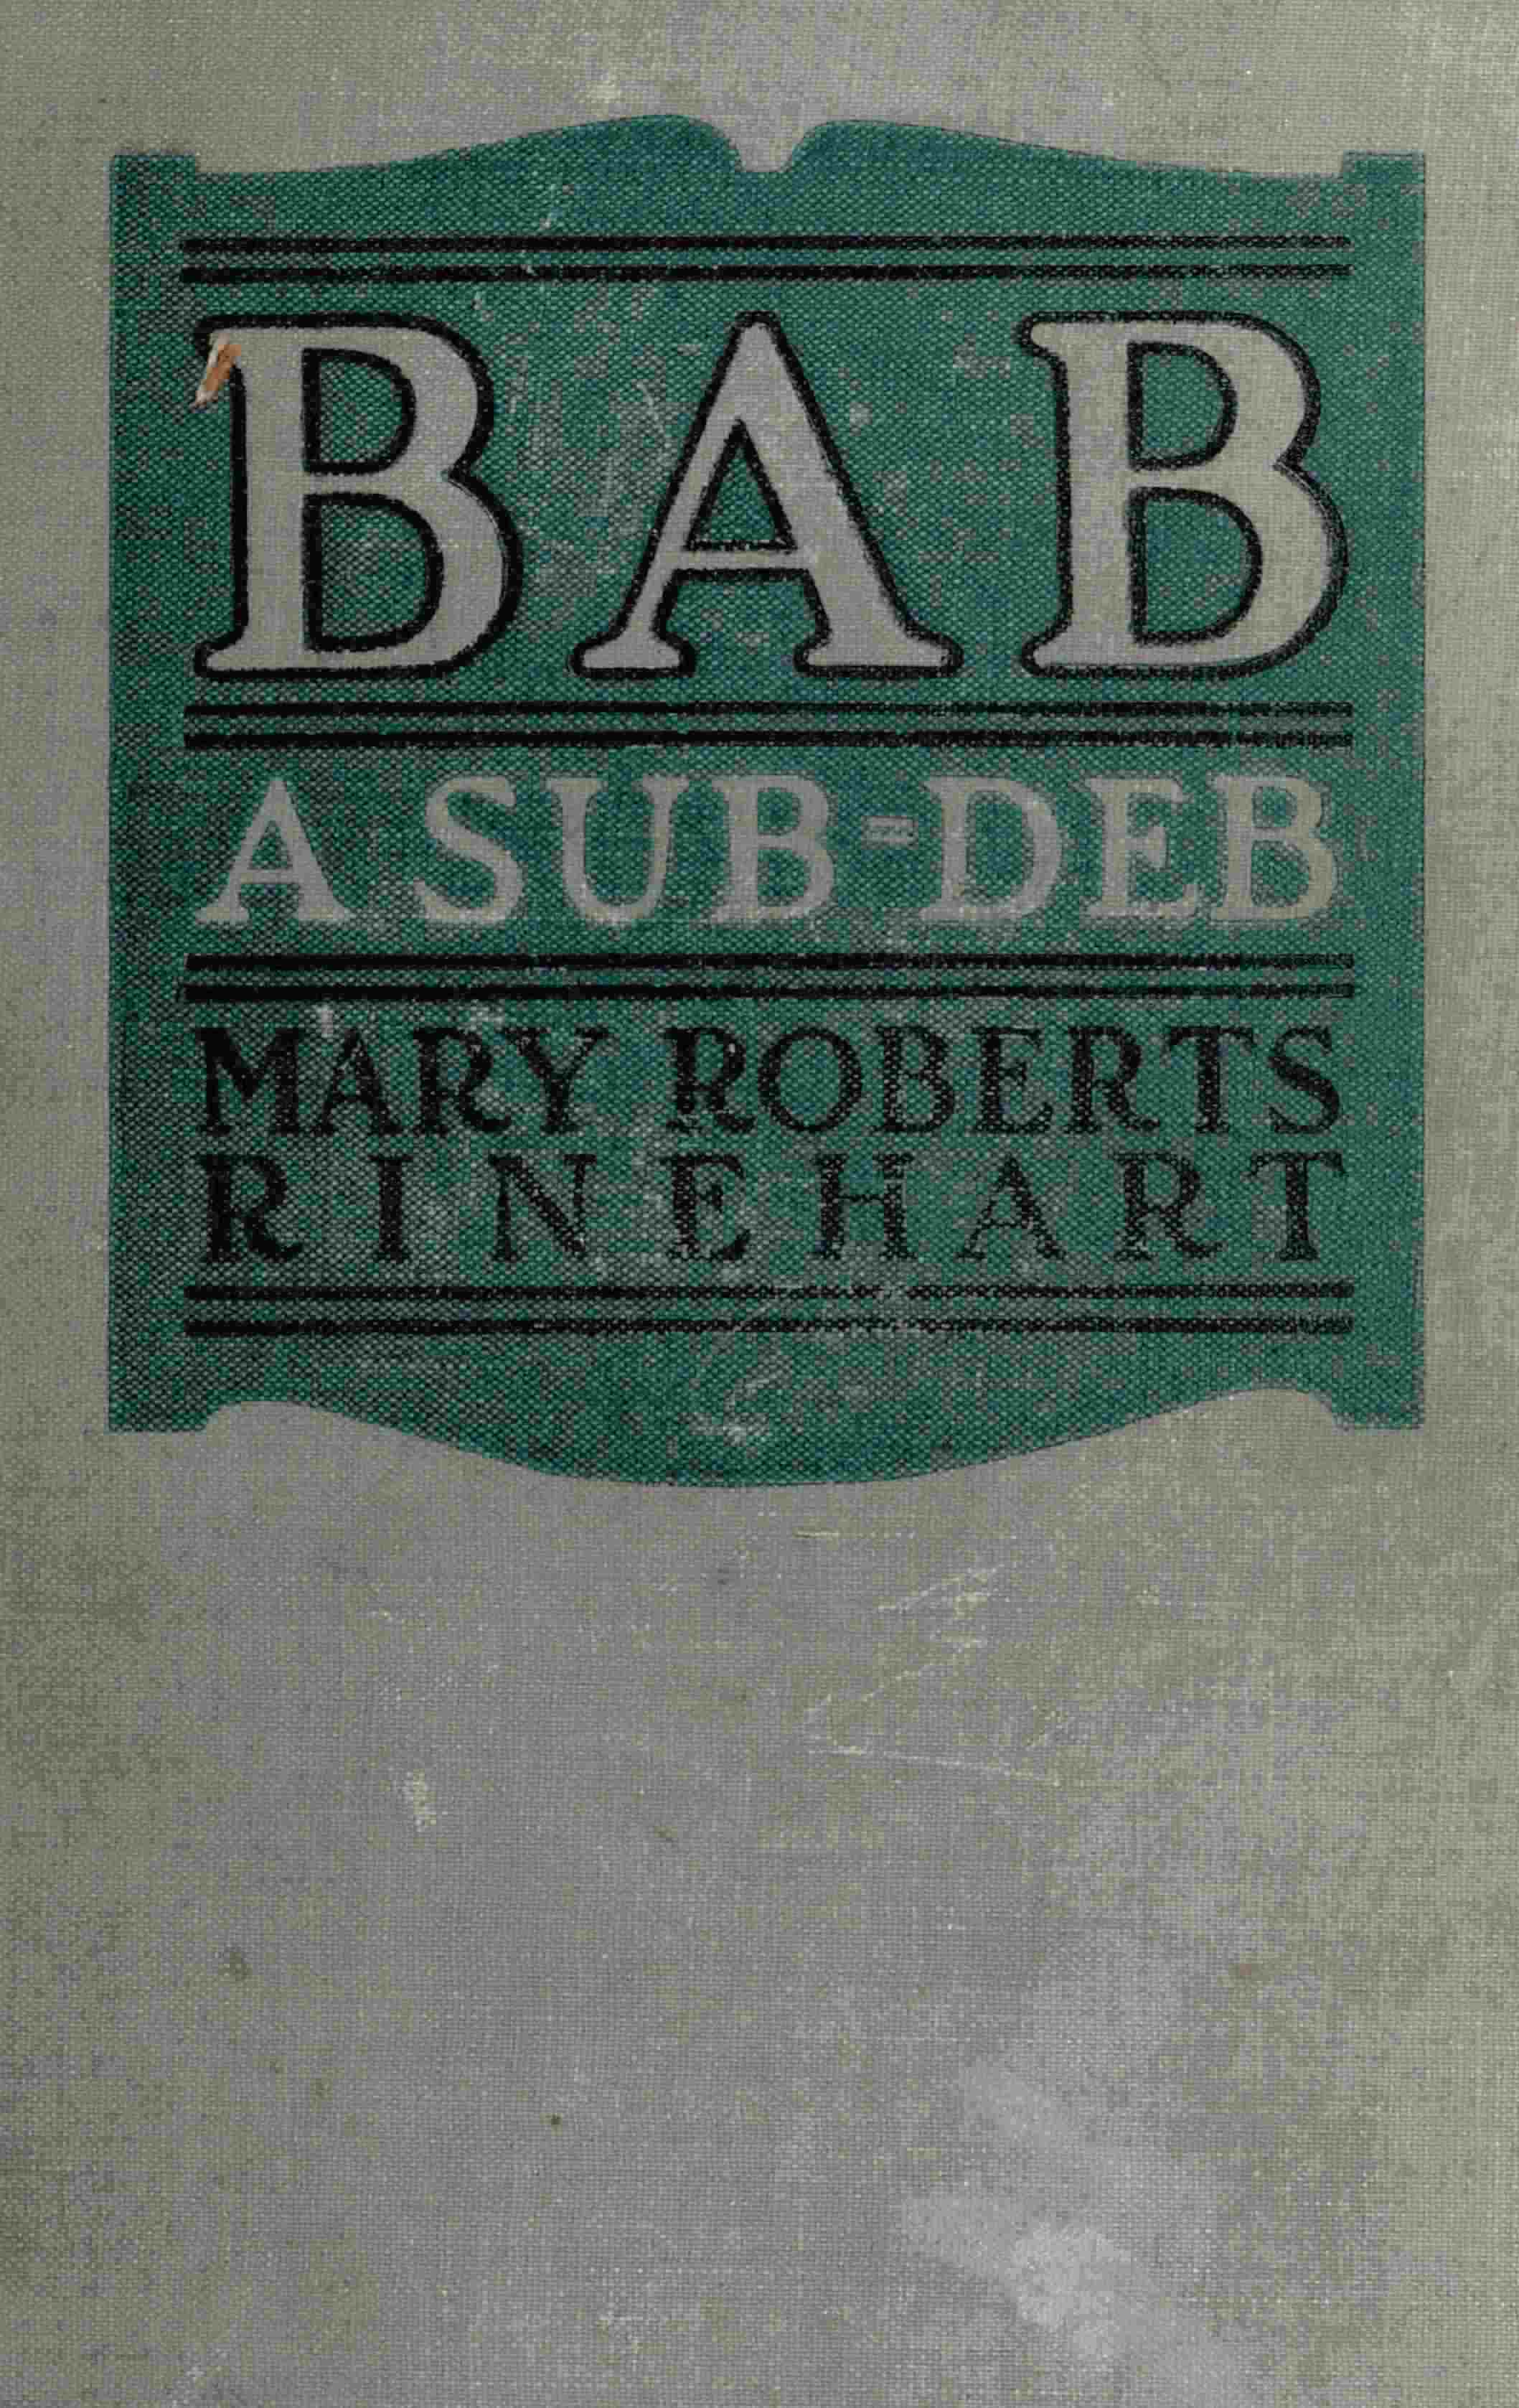 The Project Gutenberg eBook of Bab: A sub-deb, by Mary Roberts Rinehart.